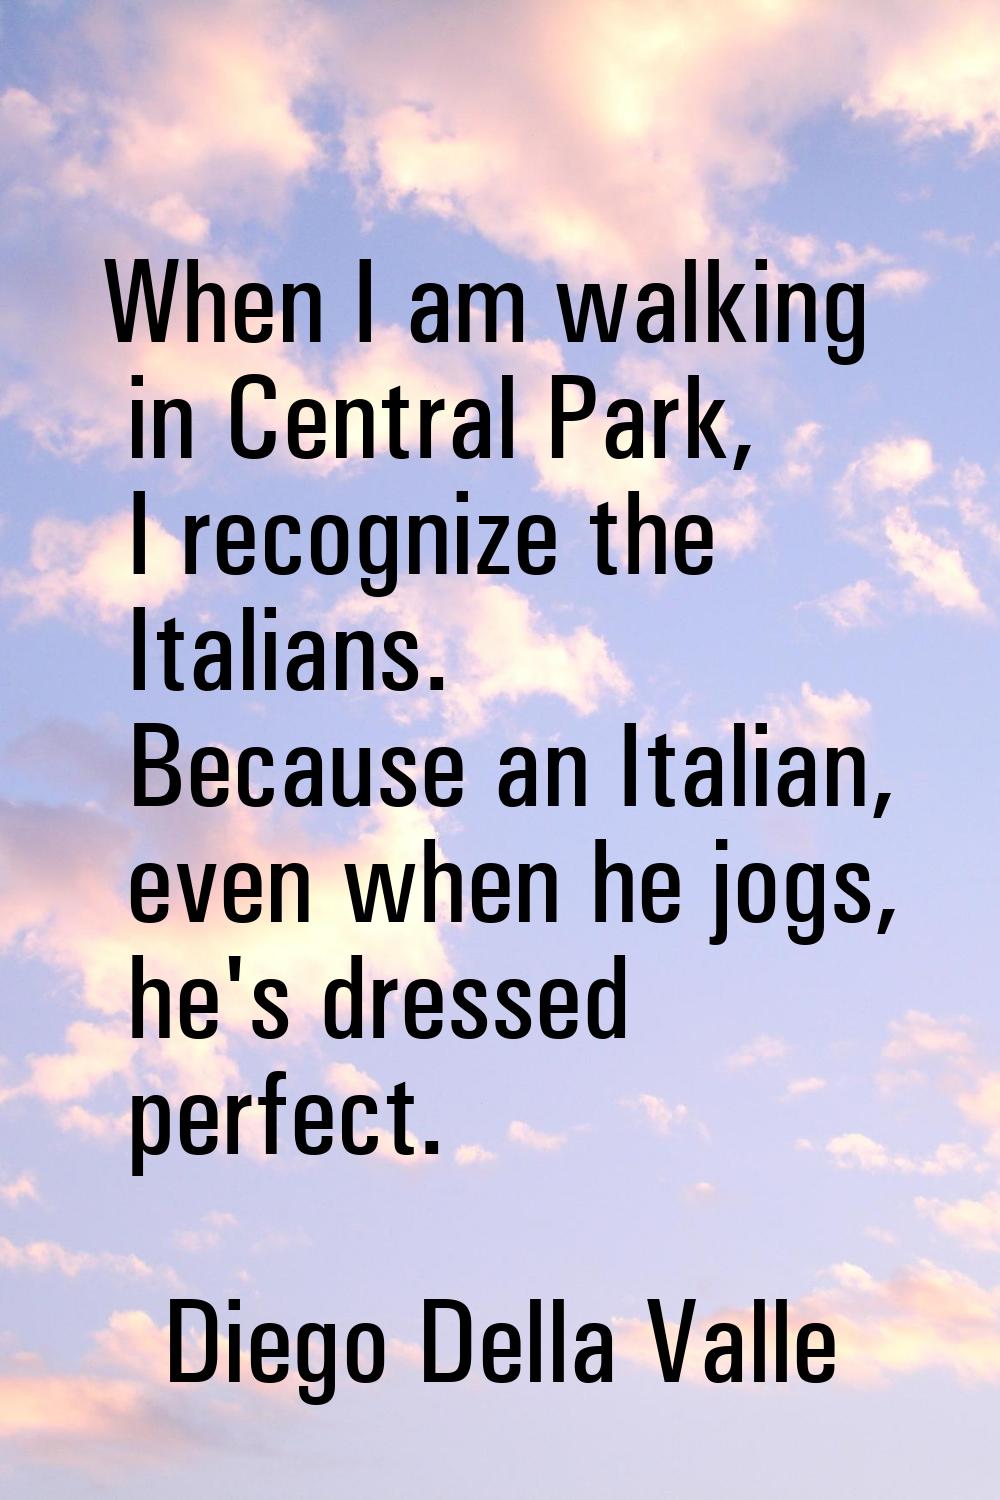 When I am walking in Central Park, I recognize the Italians. Because an Italian, even when he jogs,